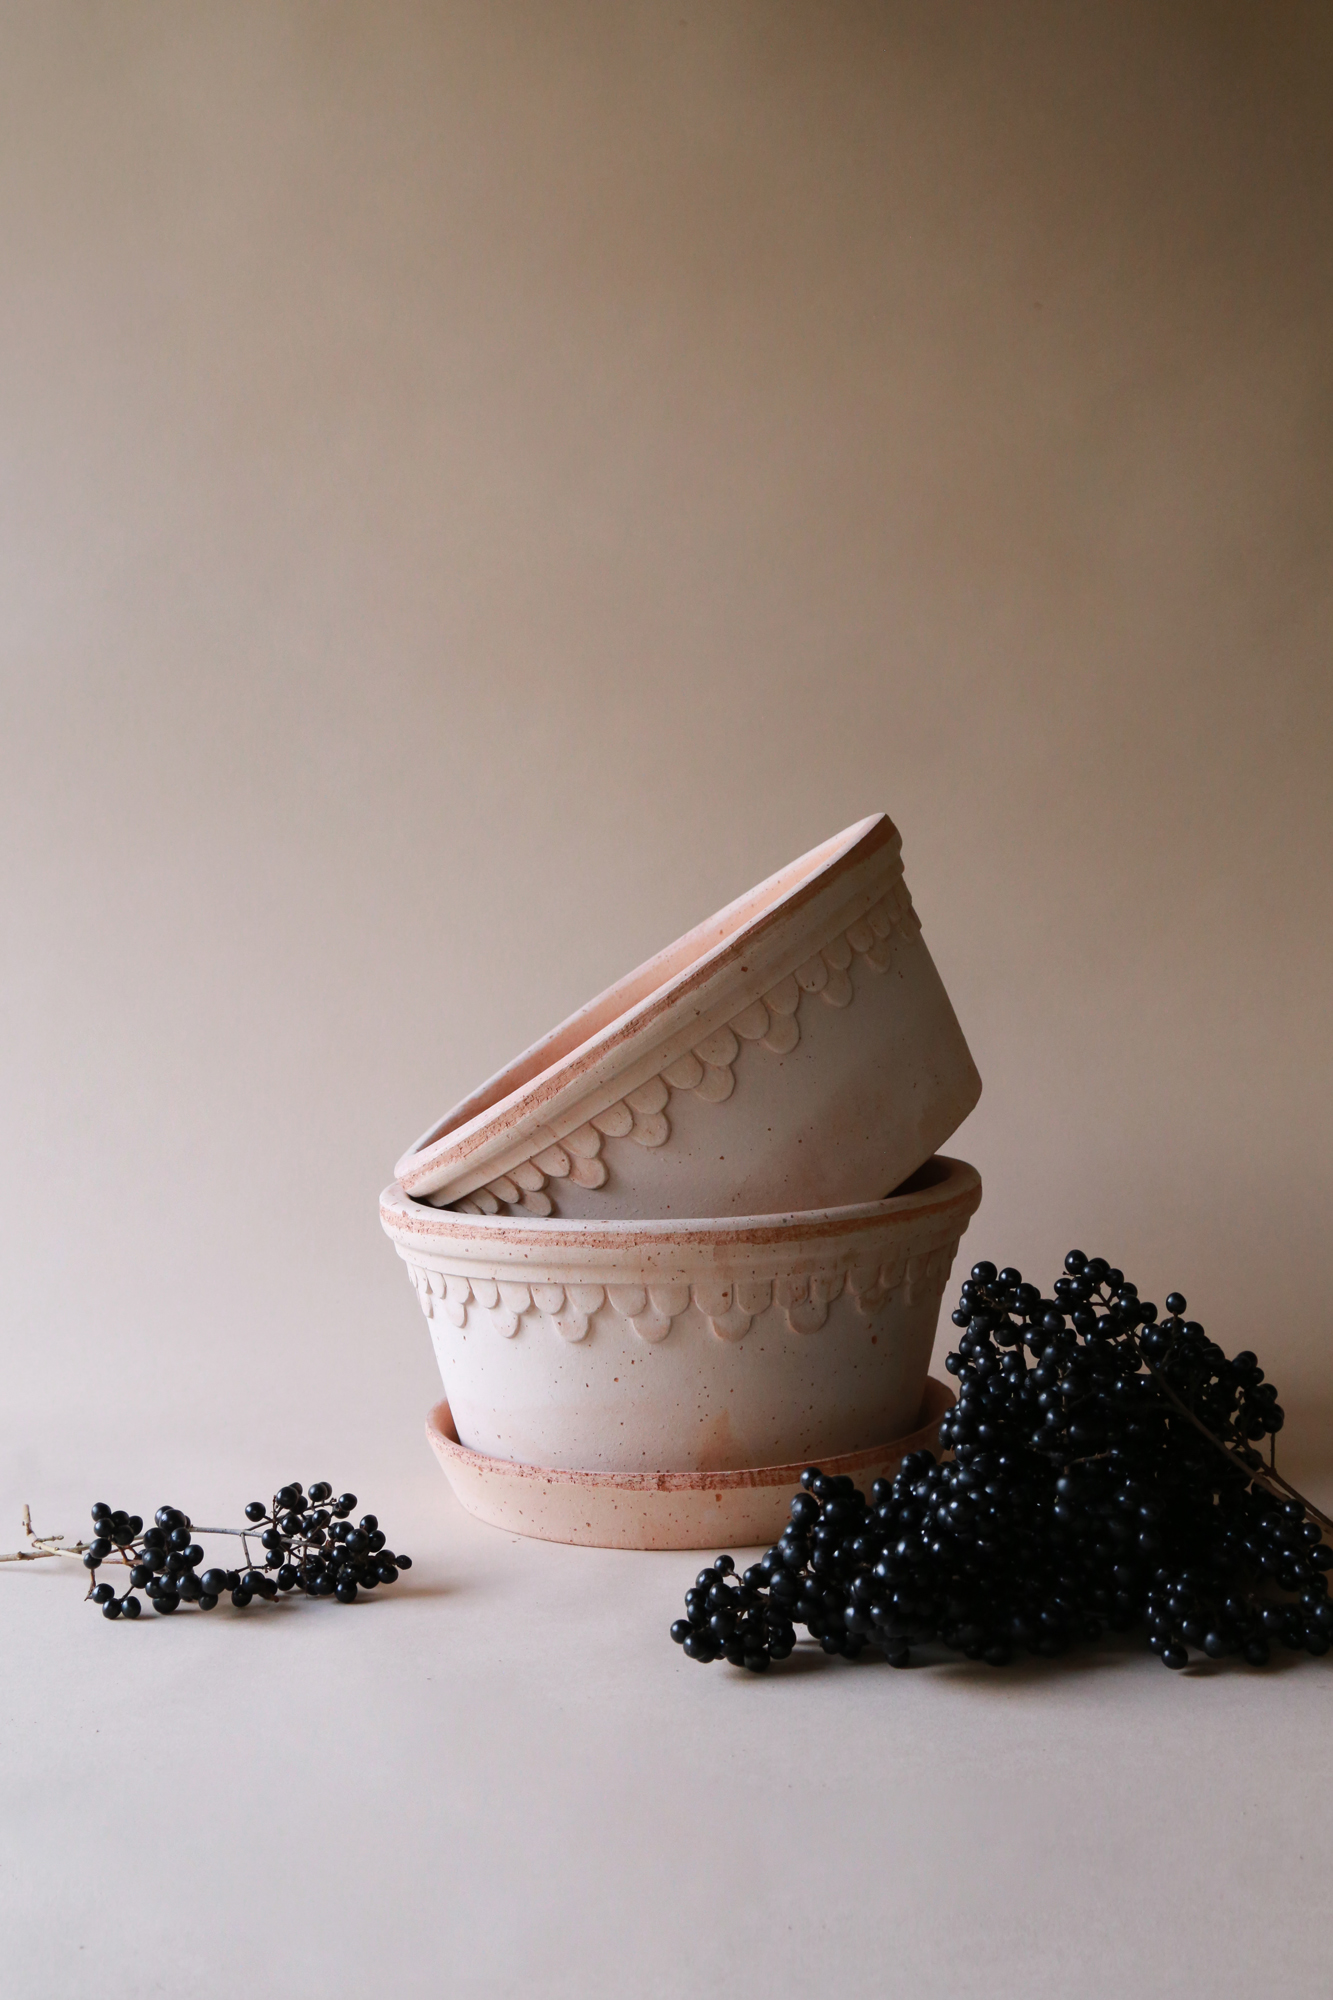 Københavner low pot. Inspired by pottery made at the Royal Palace of Fredensborg.